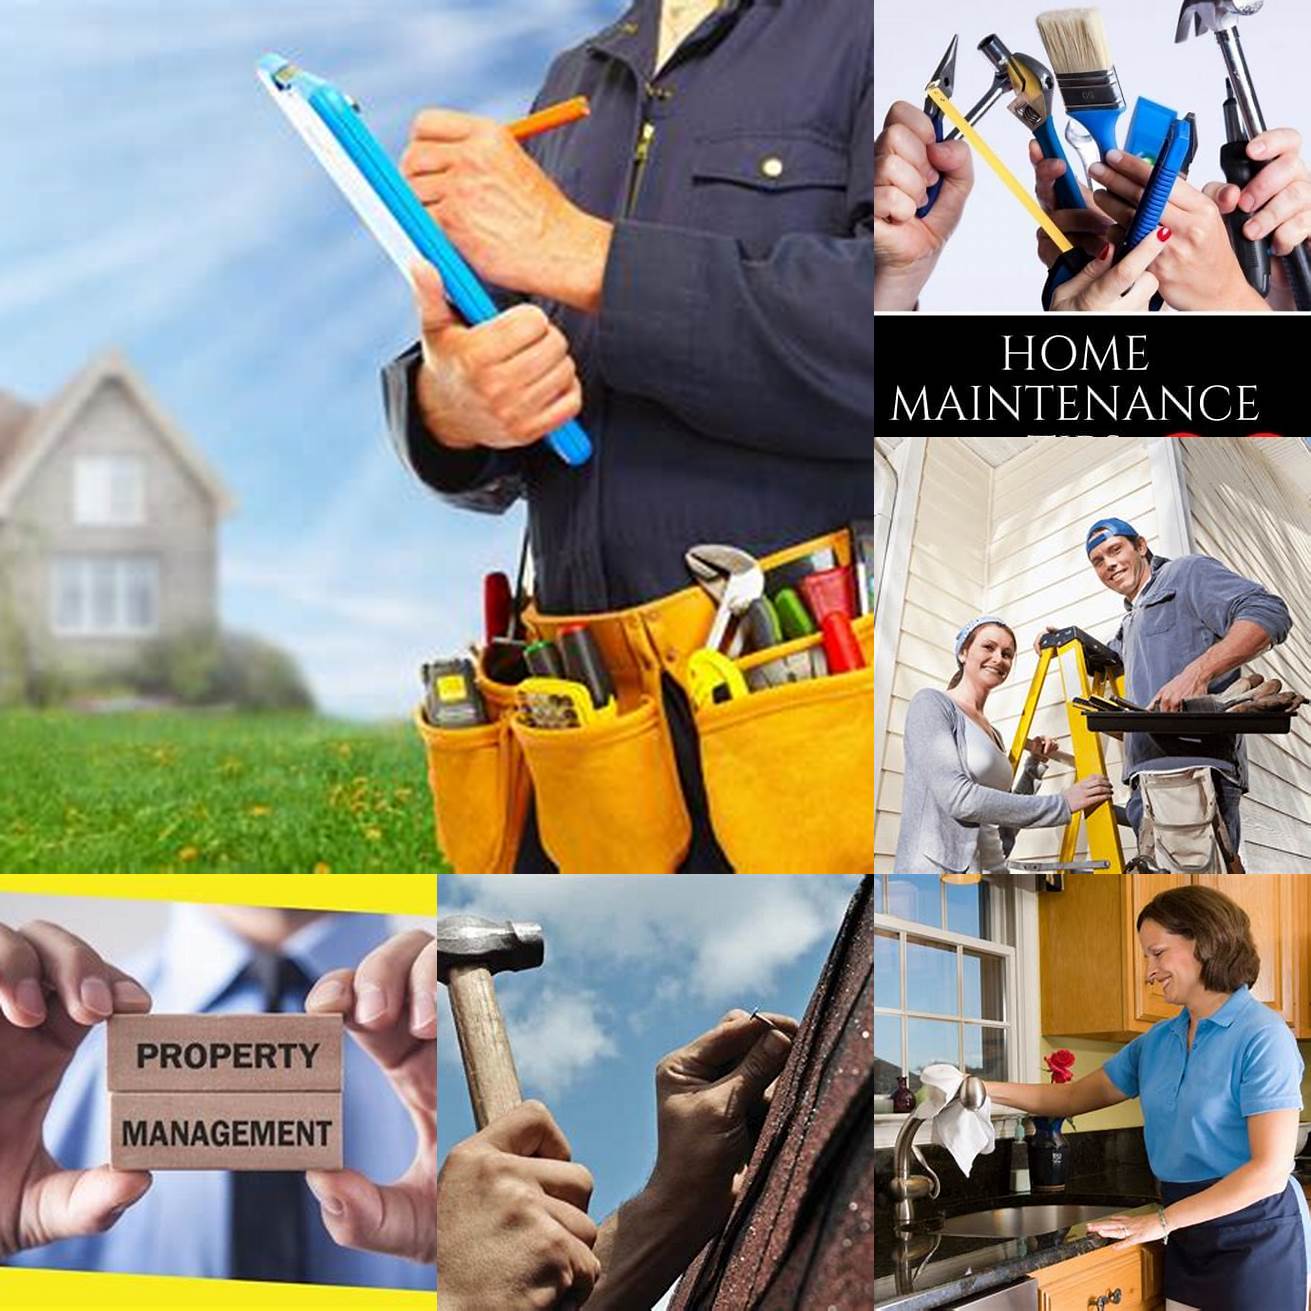 Maintenance Homeowners are responsible for maintaining their own property which can be time-consuming and expensive